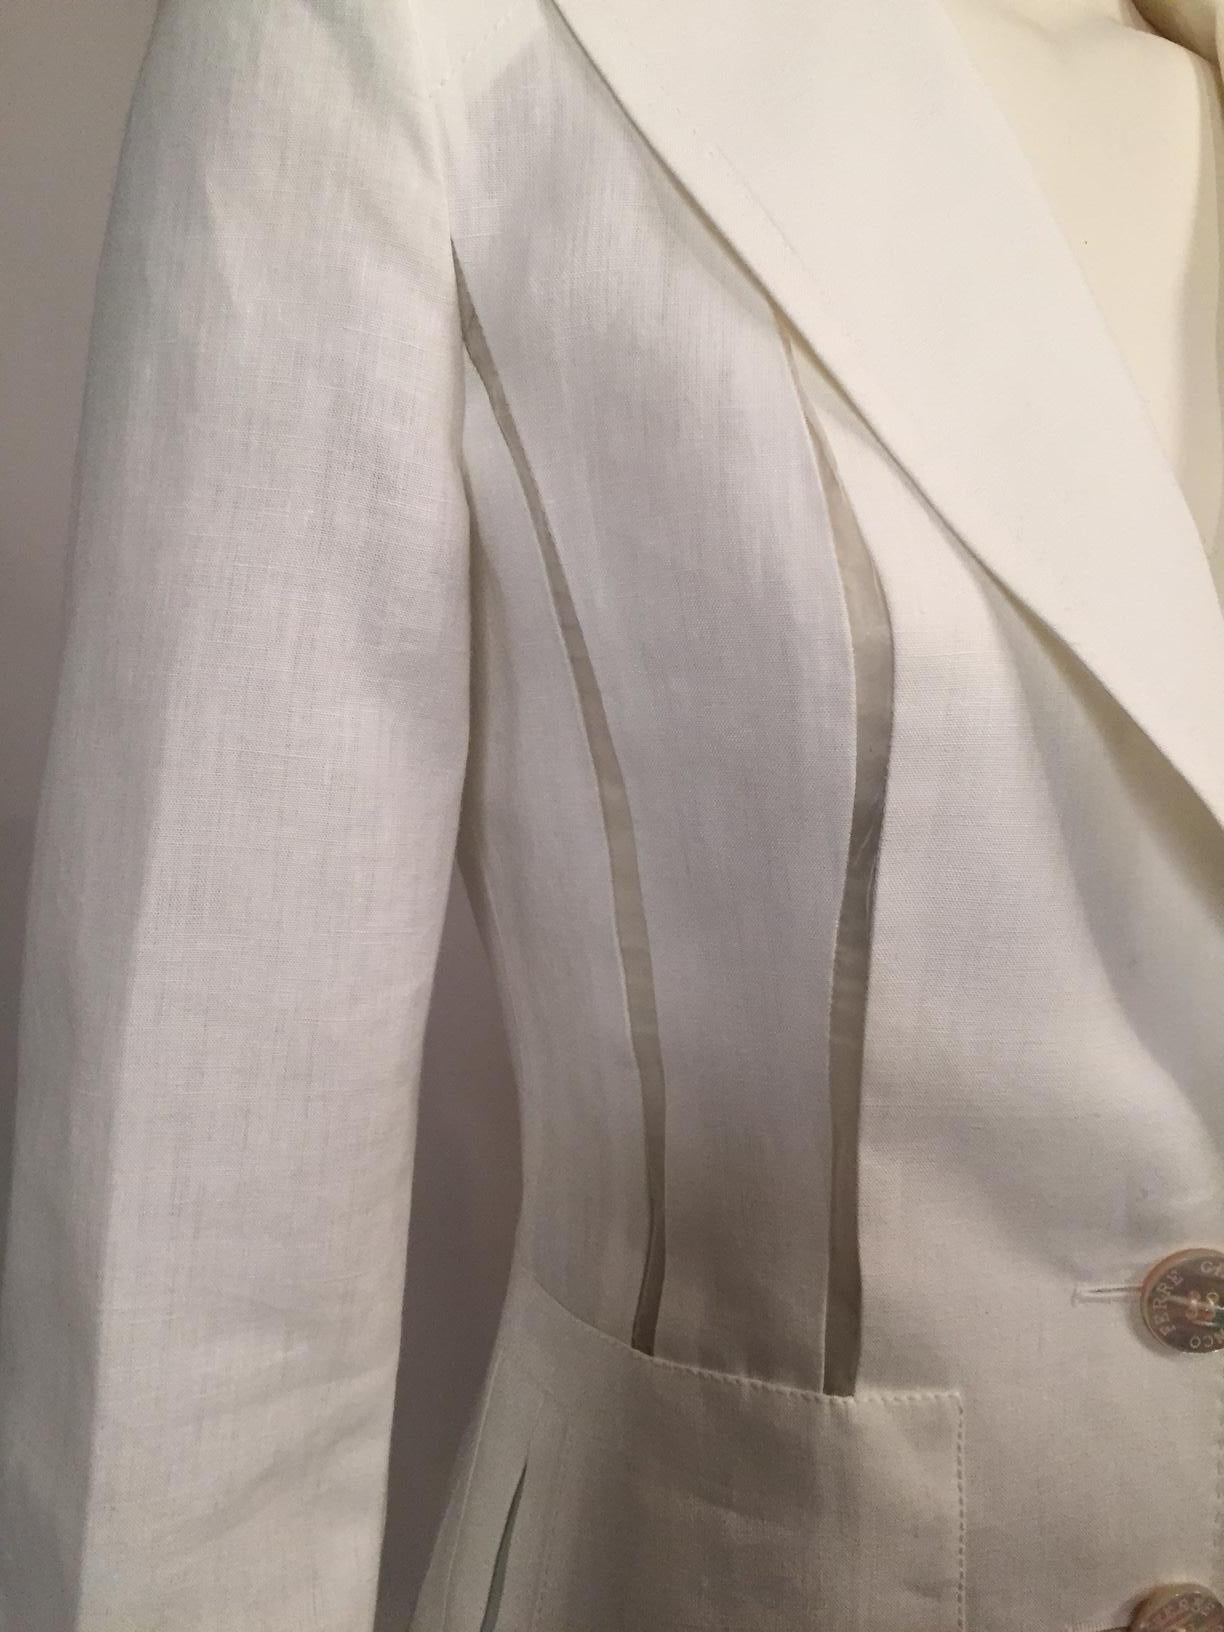 This is a fabulous white linen jacket designed by Gianfranco Ferre, elevated to another level by the addition of sheer white silk organza panels. it has a notched lapel, two button front, patch pockets with a clever opening, and the vertical sheer